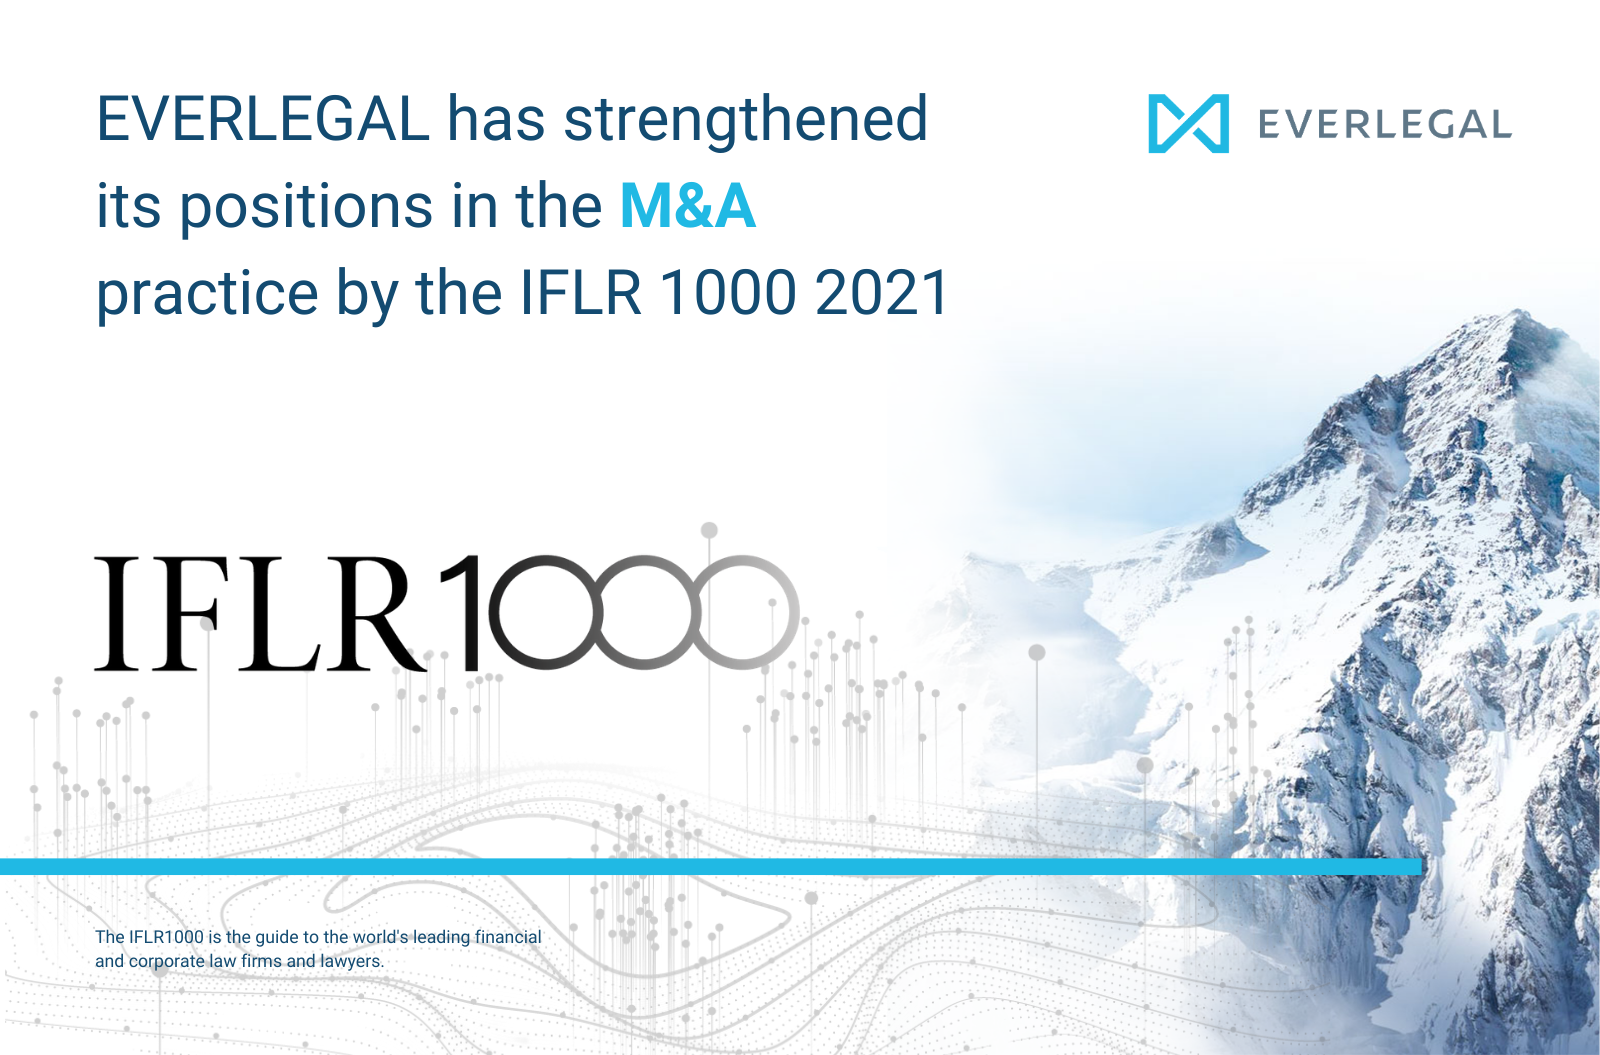 EVERLEGAL has strengthened its positions in the M&A practice according to the IFLR1000 2021